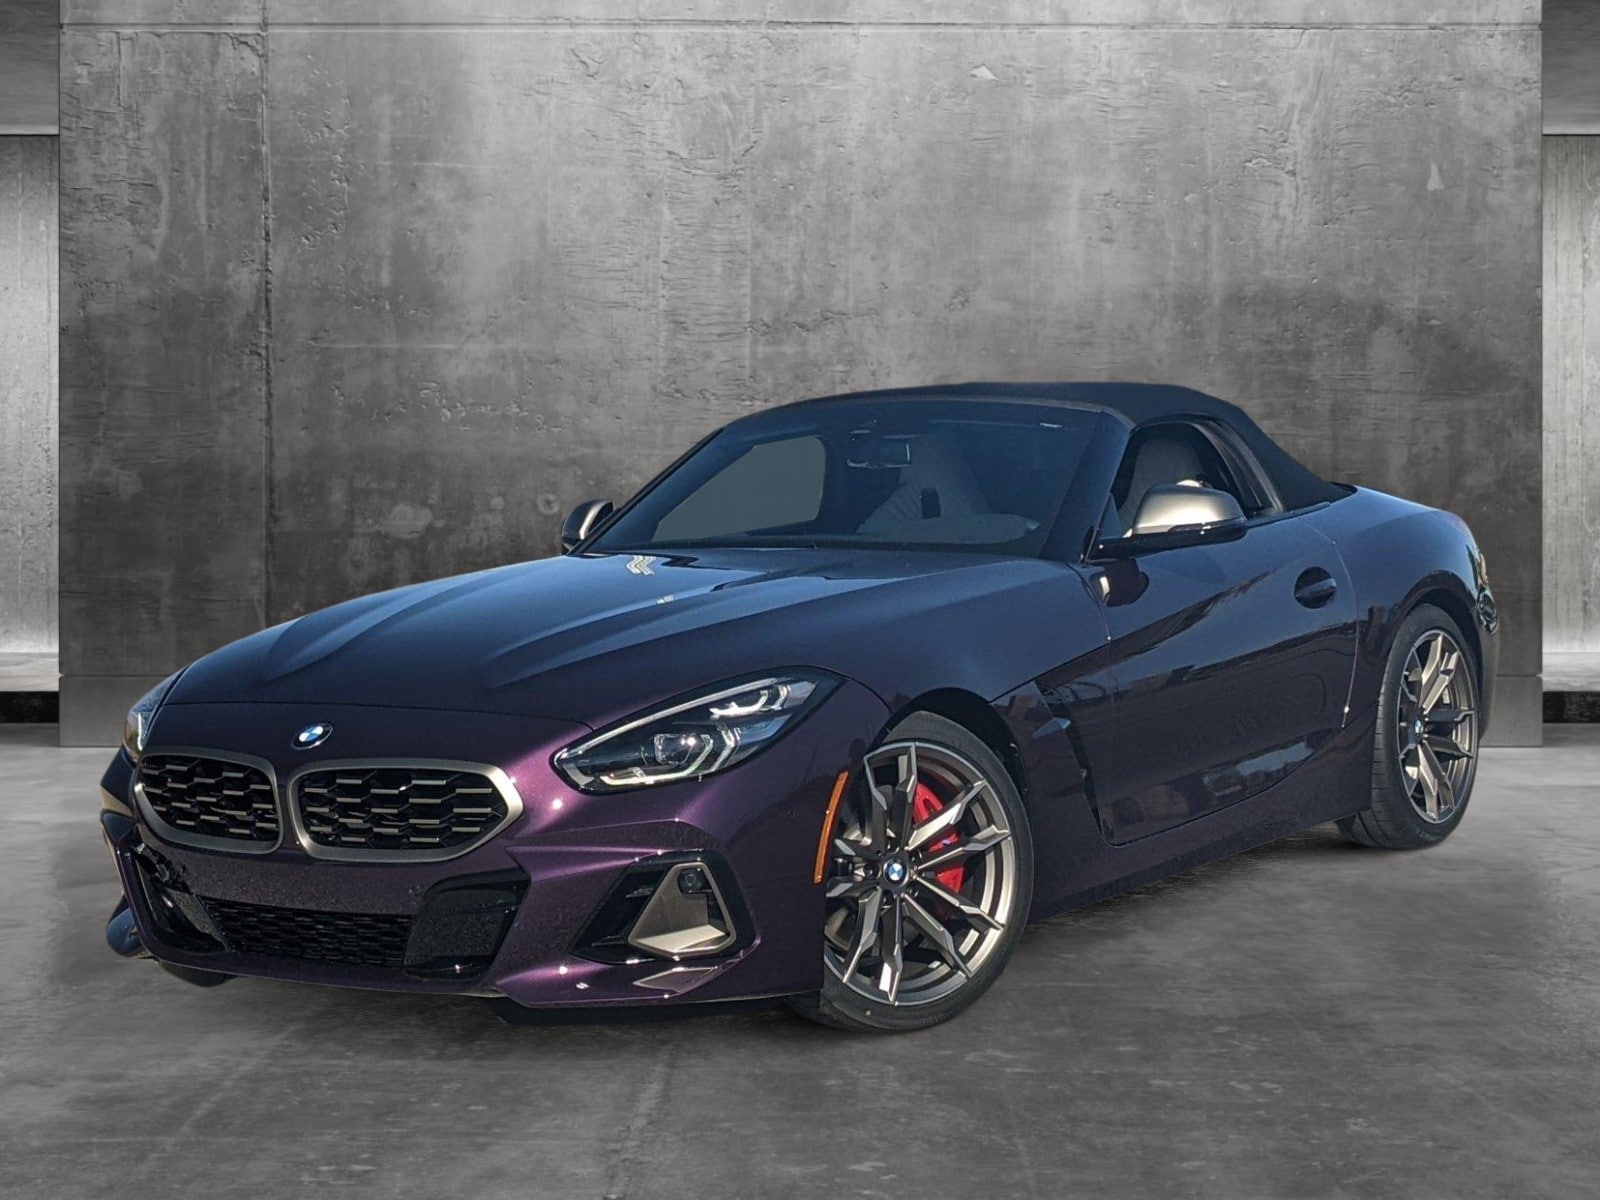 The New BMW Z4 M40i